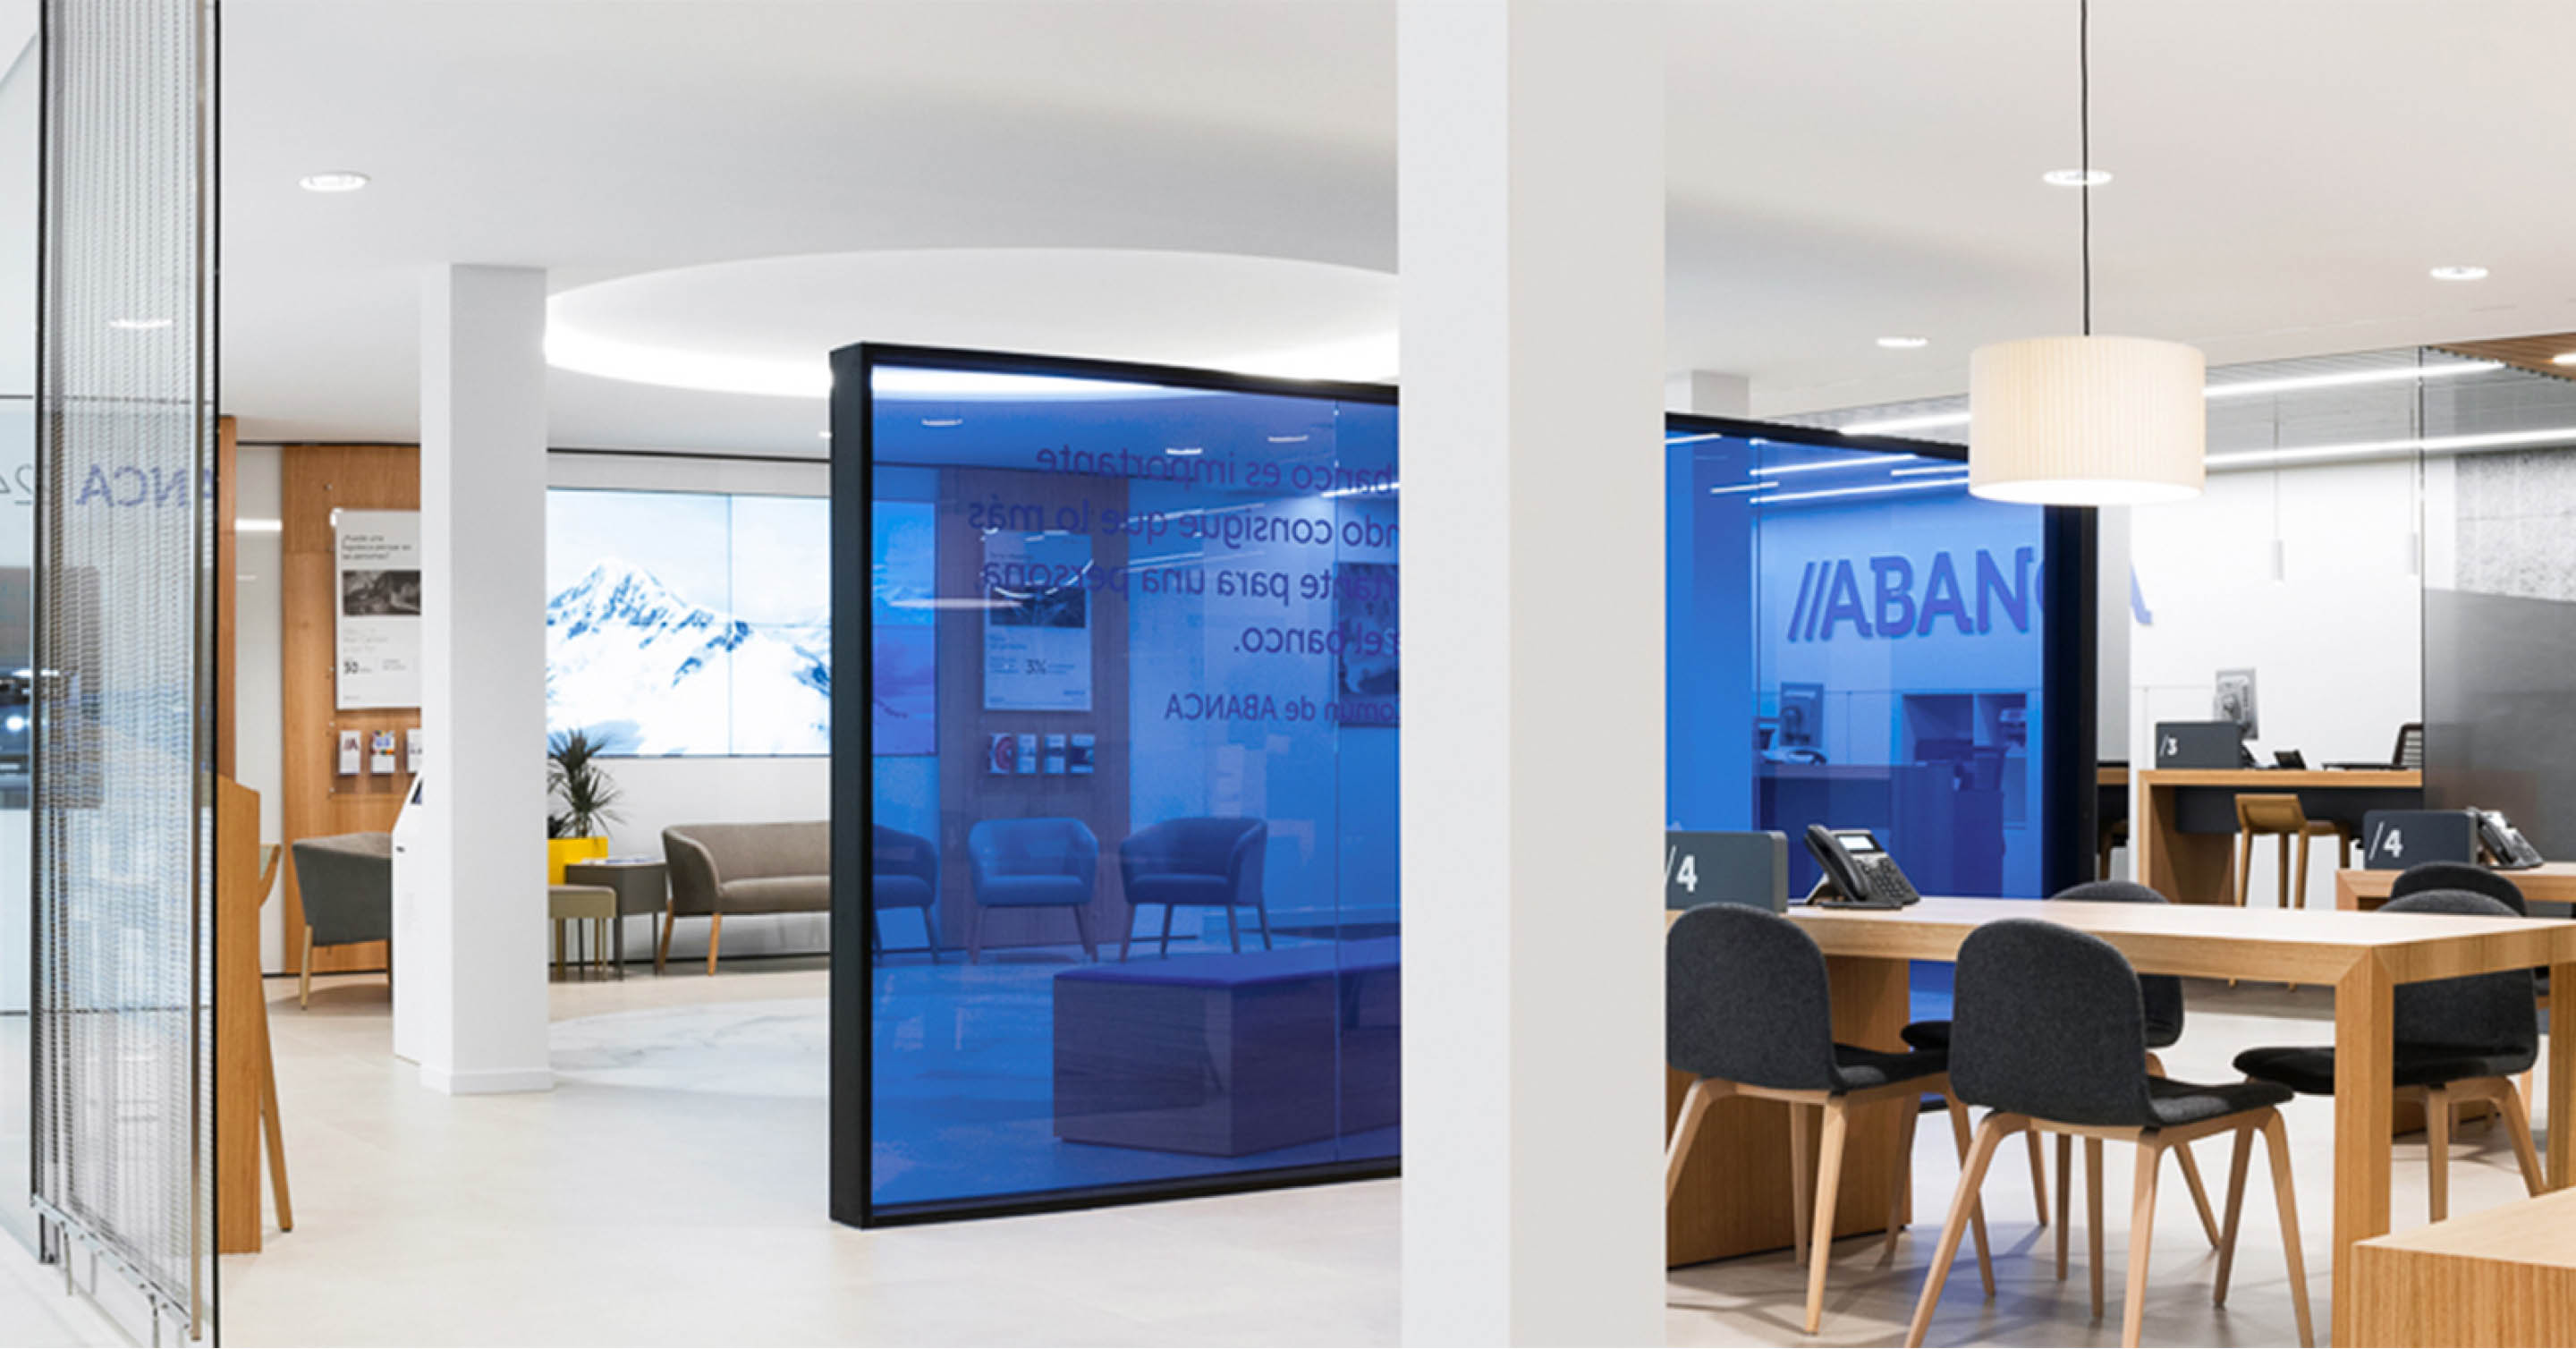 Abanca is a bank born from the merger of two regional Galician entities that harnessed this fusion to redefine not only its identity, but also the entire user experience.
